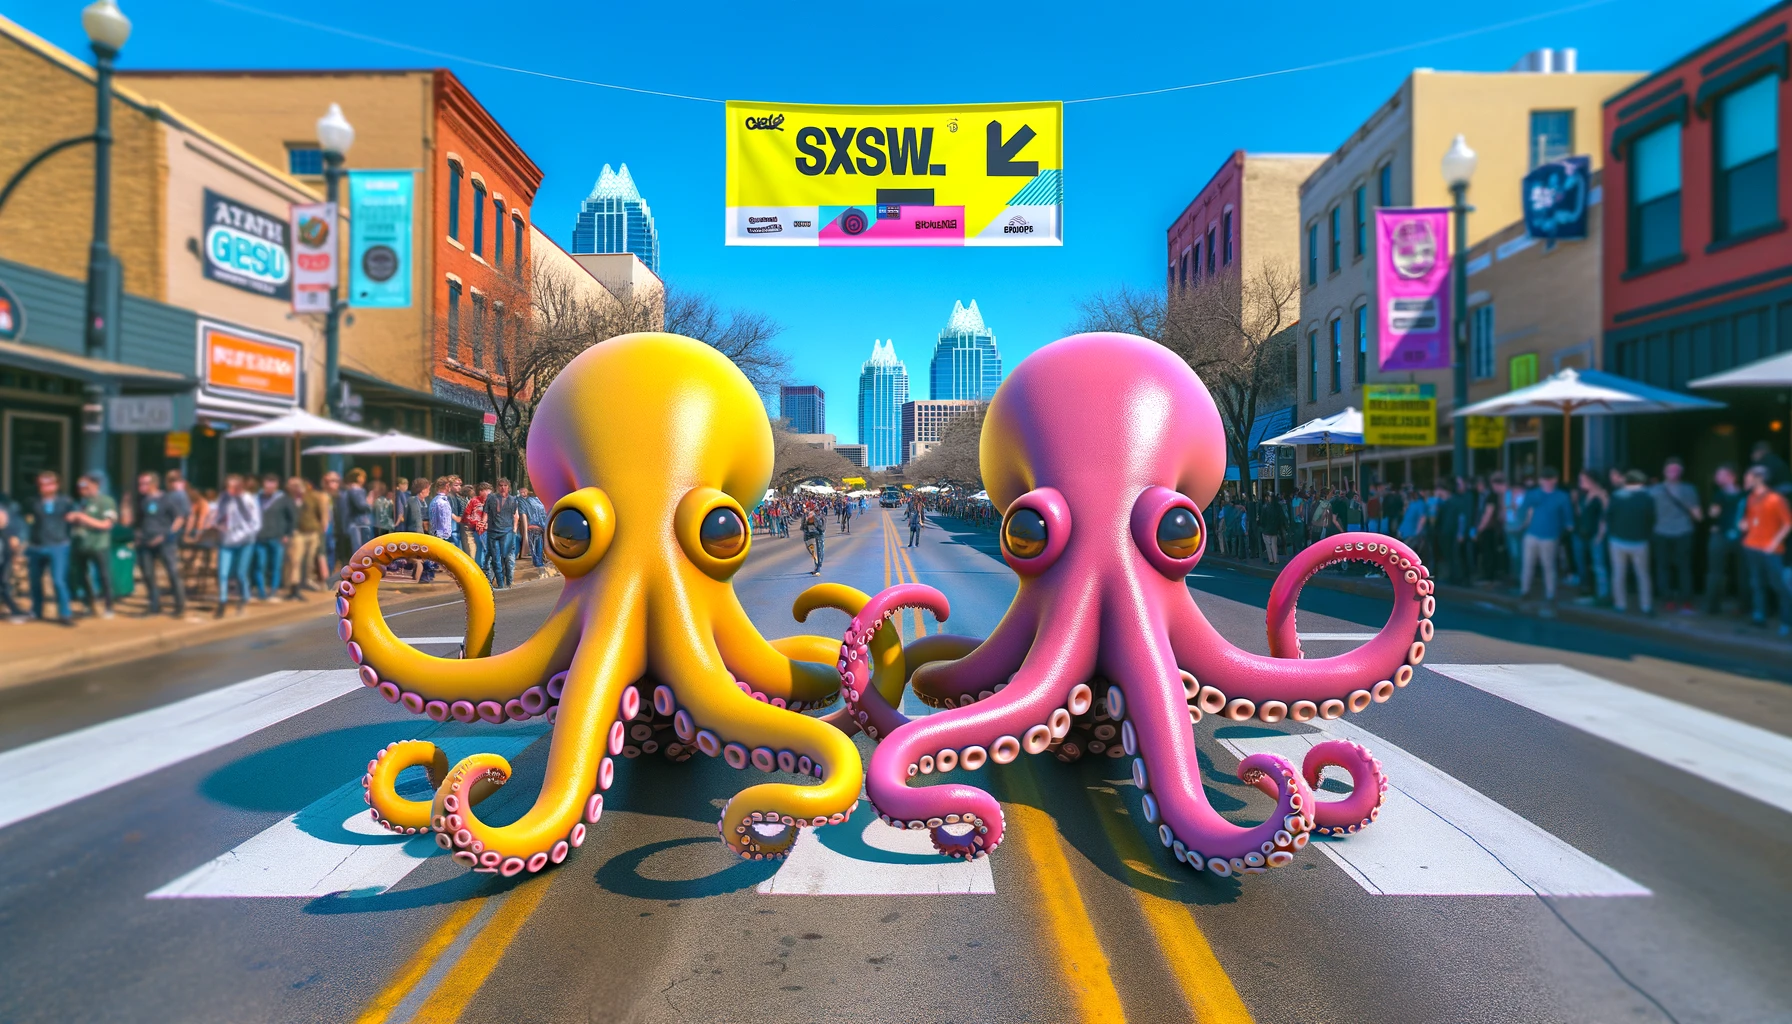 An animated images of two Octopi walking in downtown Austin, TX. A SXSW banner is in the background